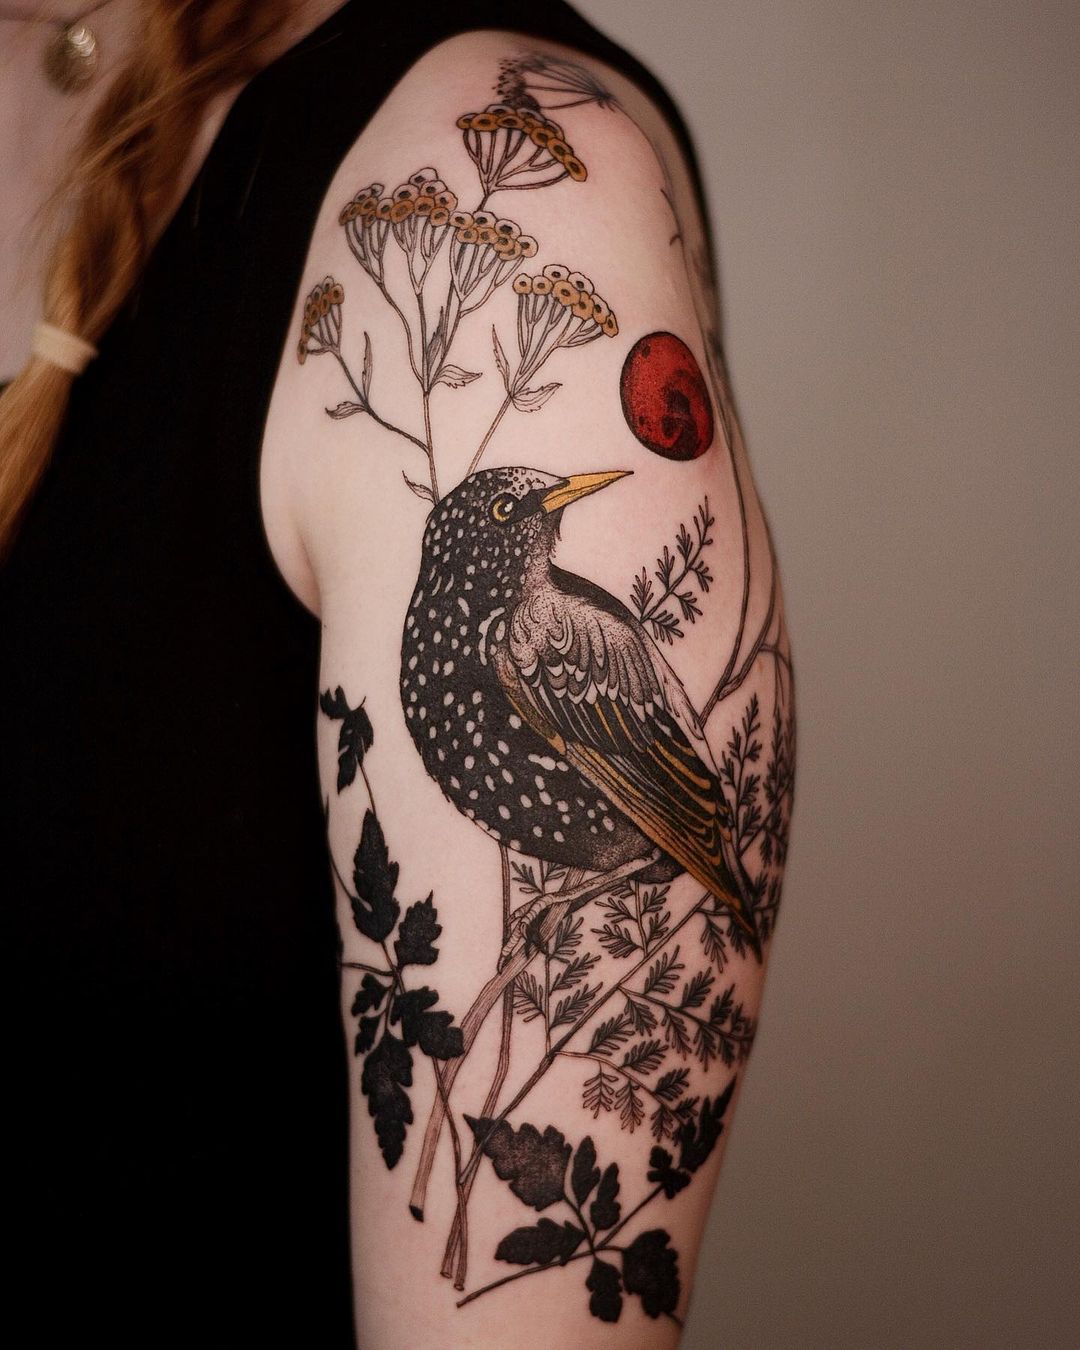 Whimsical Illustrative Tattoo Art Inspired by Animals and Plant Life